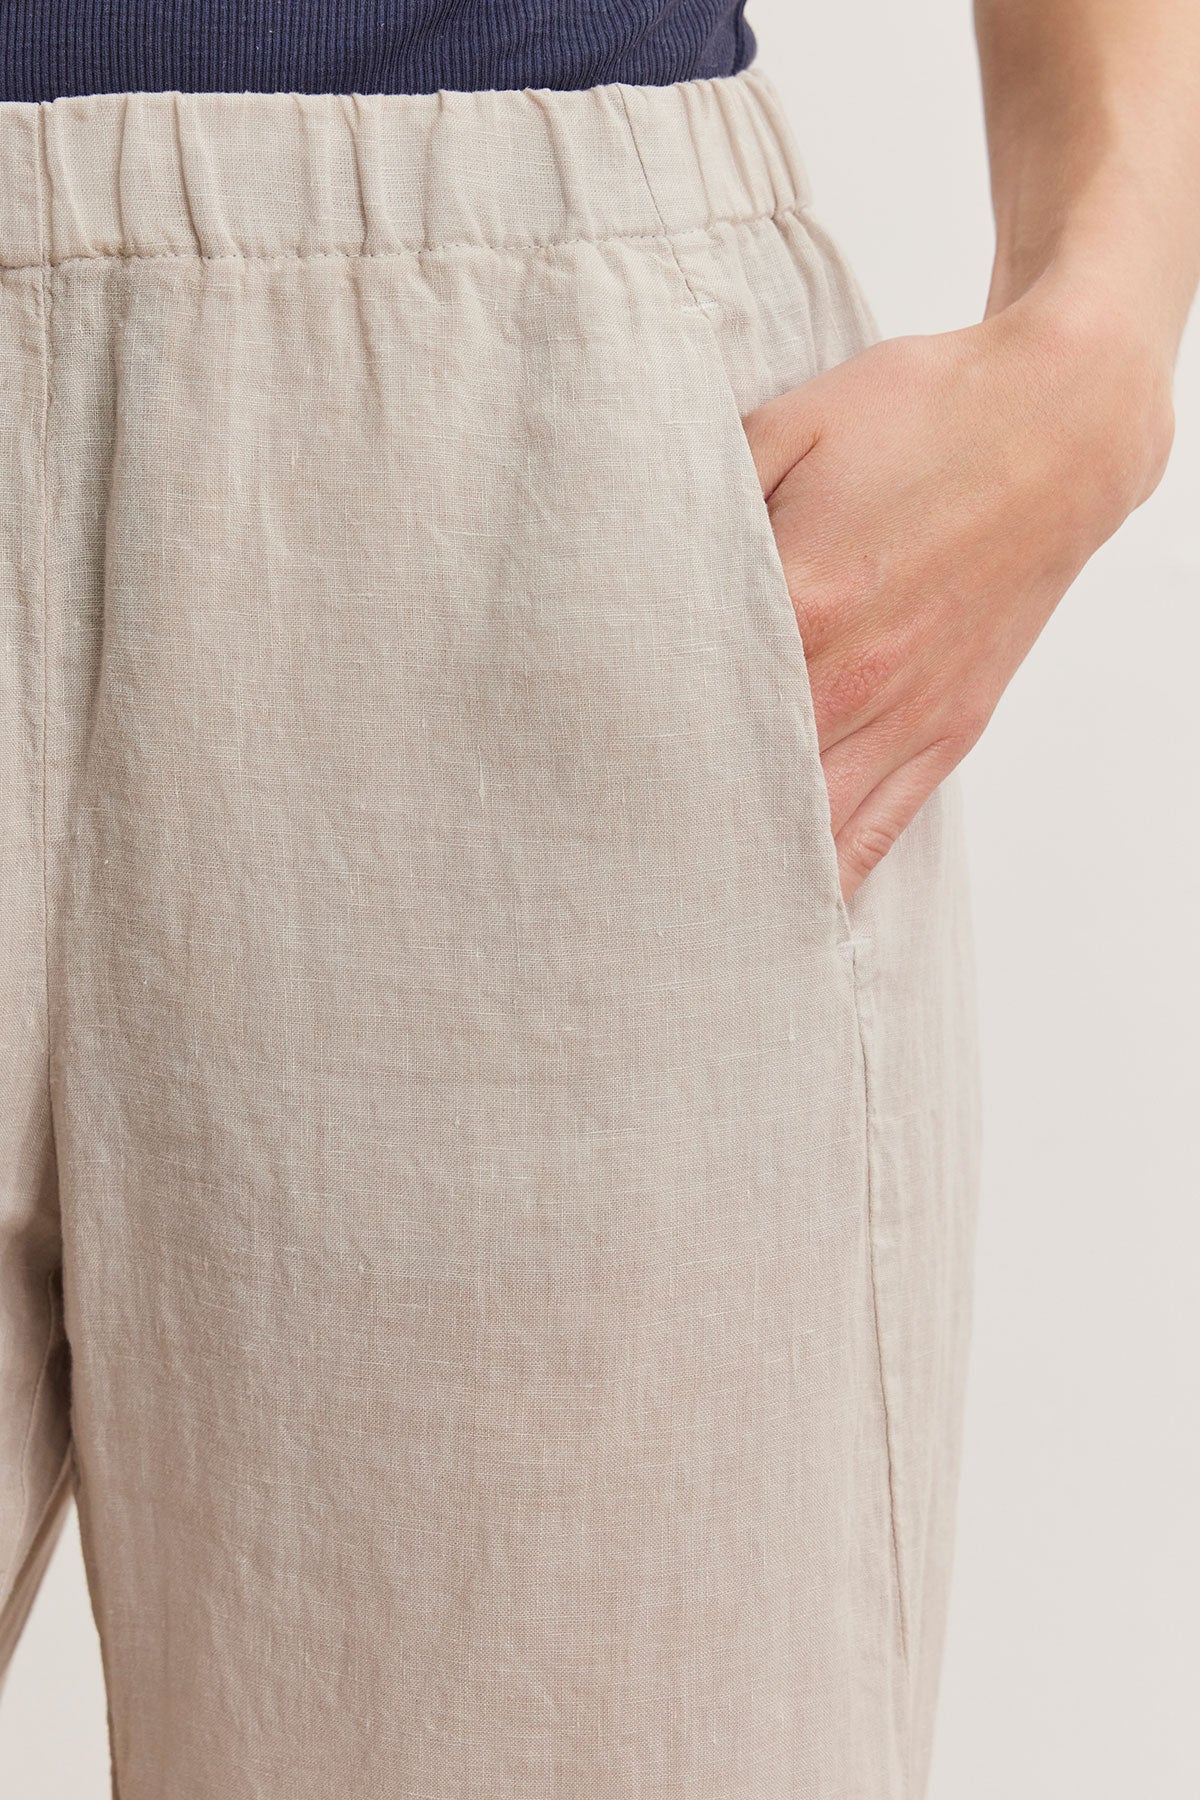 Close-up of a person wearing Velvet by Graham & Spencer LOLA LINEN PANT with an elastic waistband and a hidden side pocket. The person has one hand in the pocket.-36998848413889